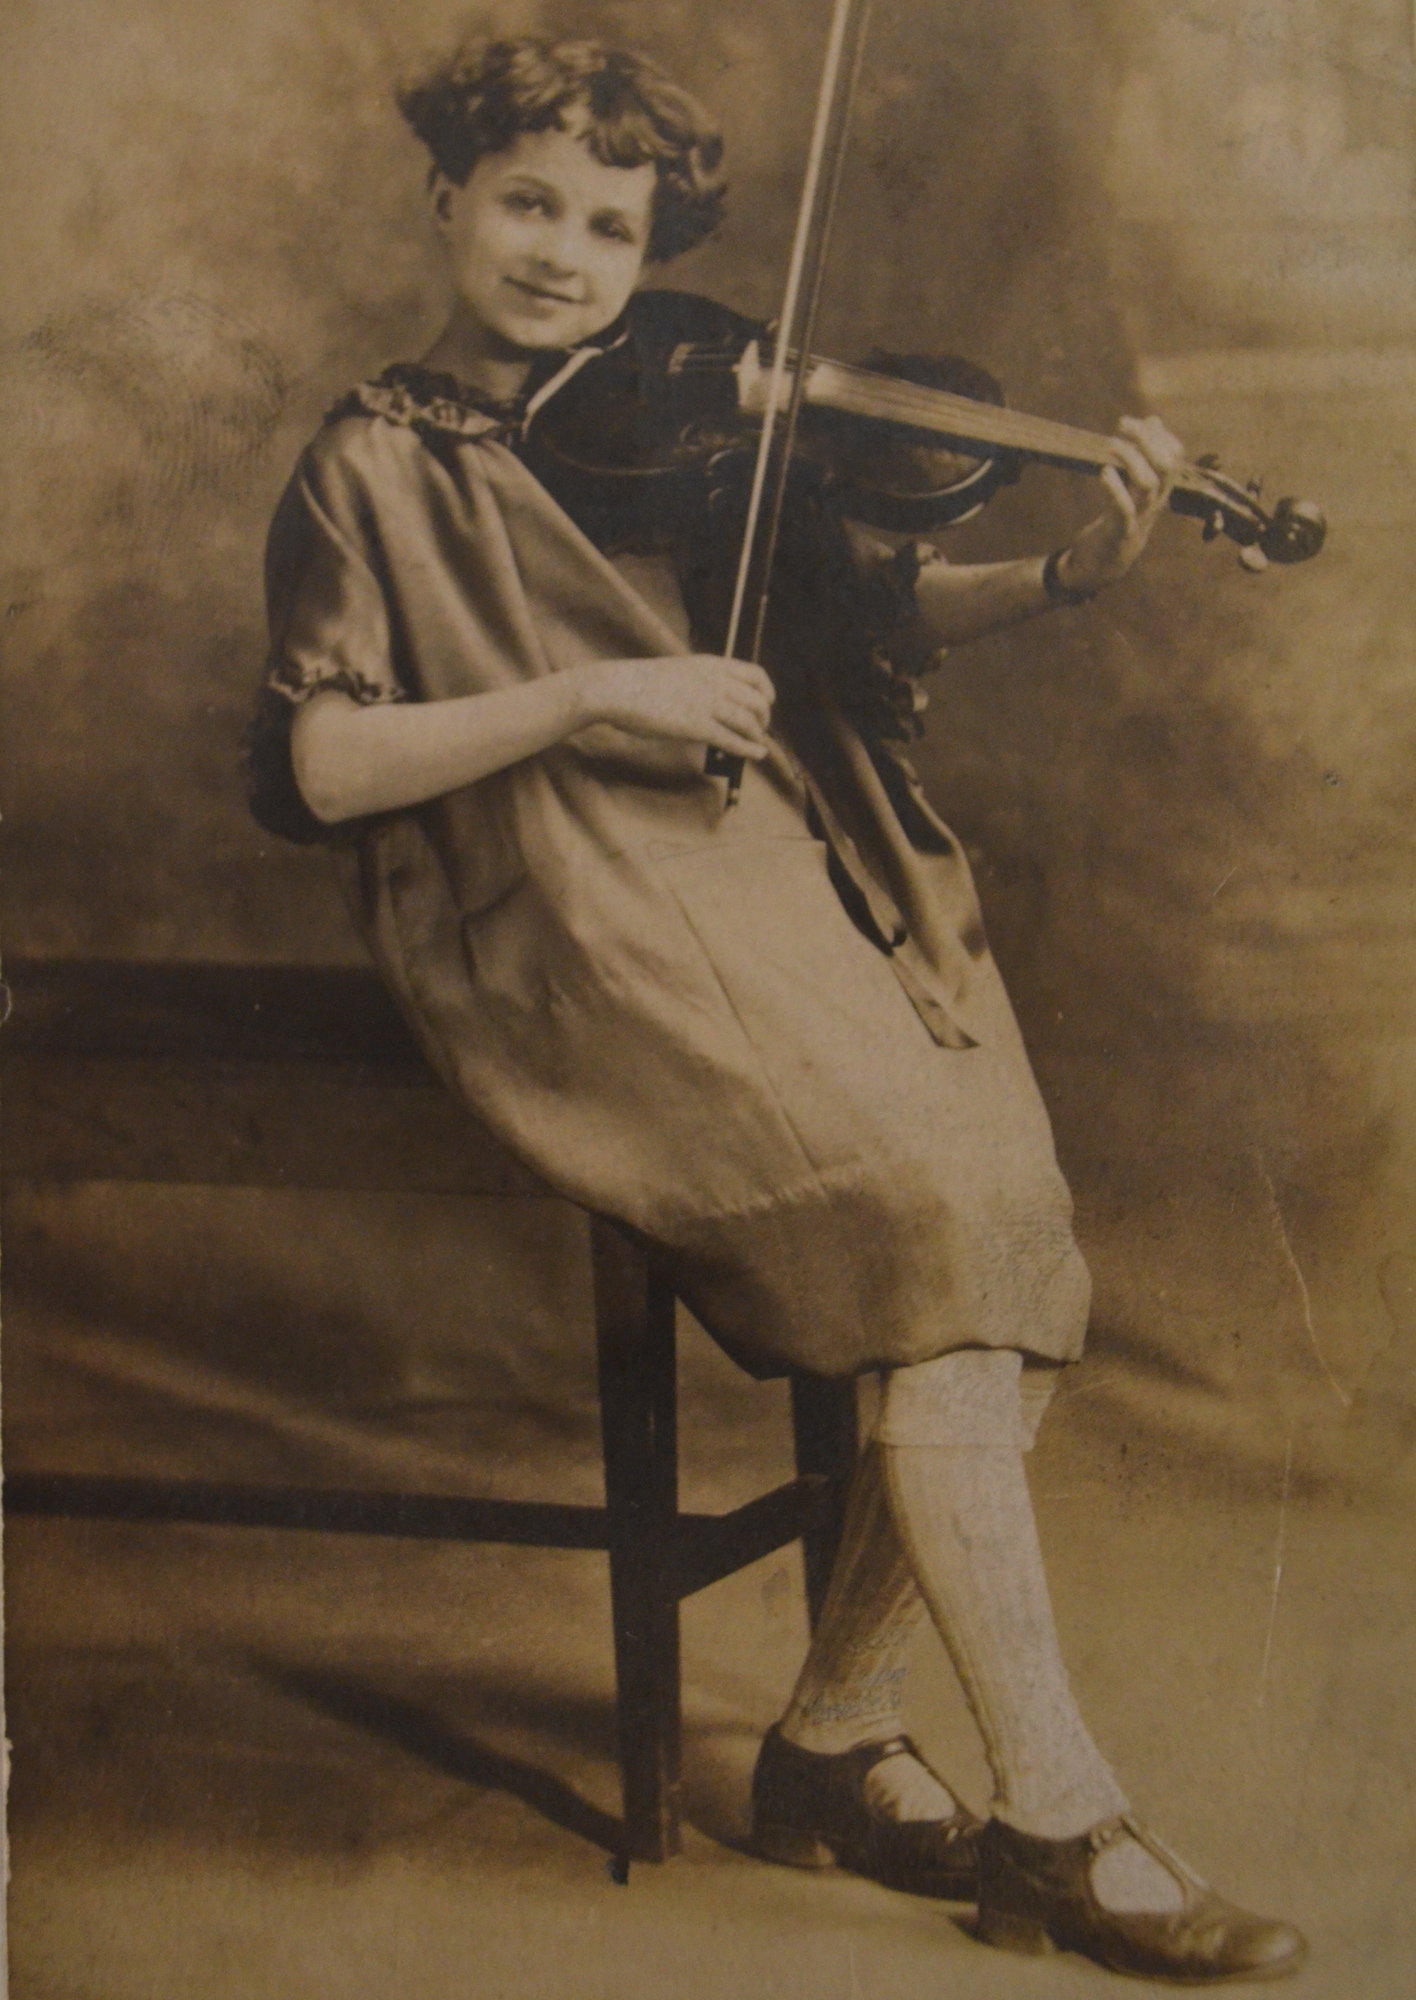 Florence Katz found her love of music at age 6.